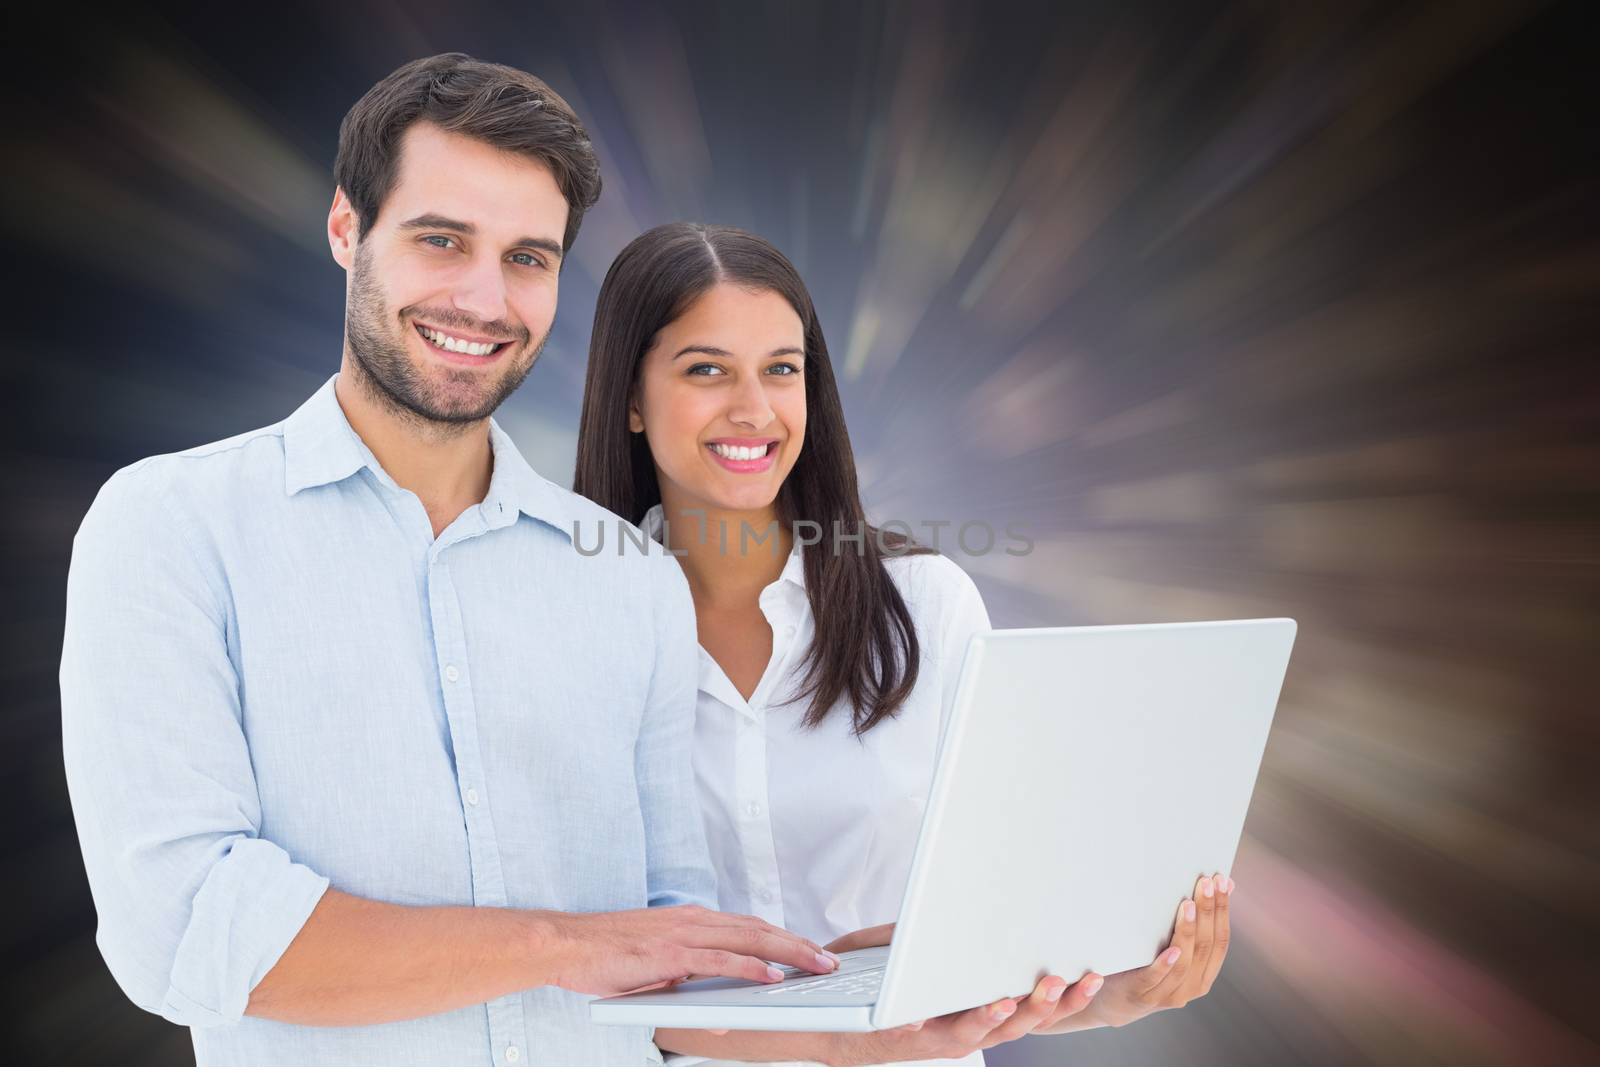 Attractive young couple holding their laptop against dark abstract light spot design